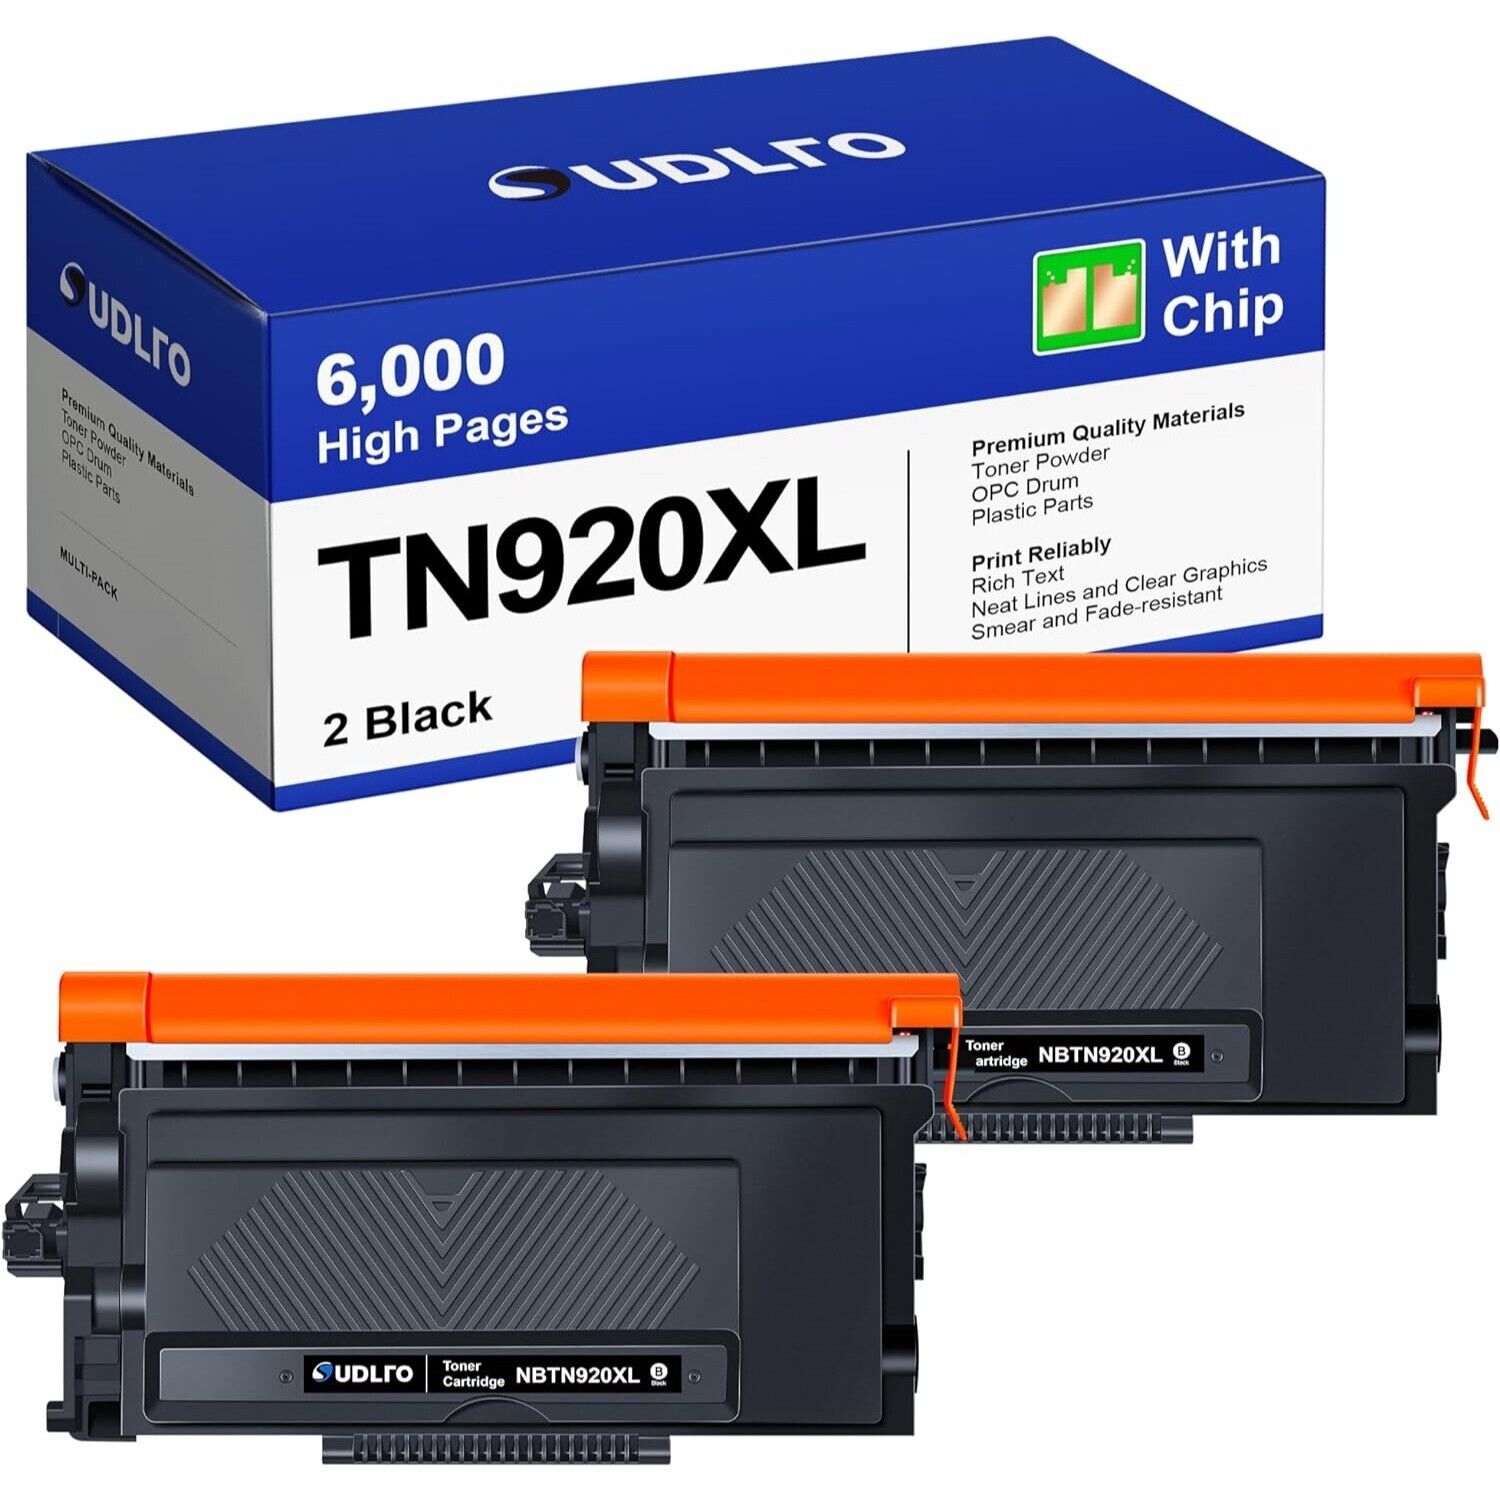 TN920XL - High Yield - TN920 TN920UXXL with Chip Compatible with Brother TN920XL